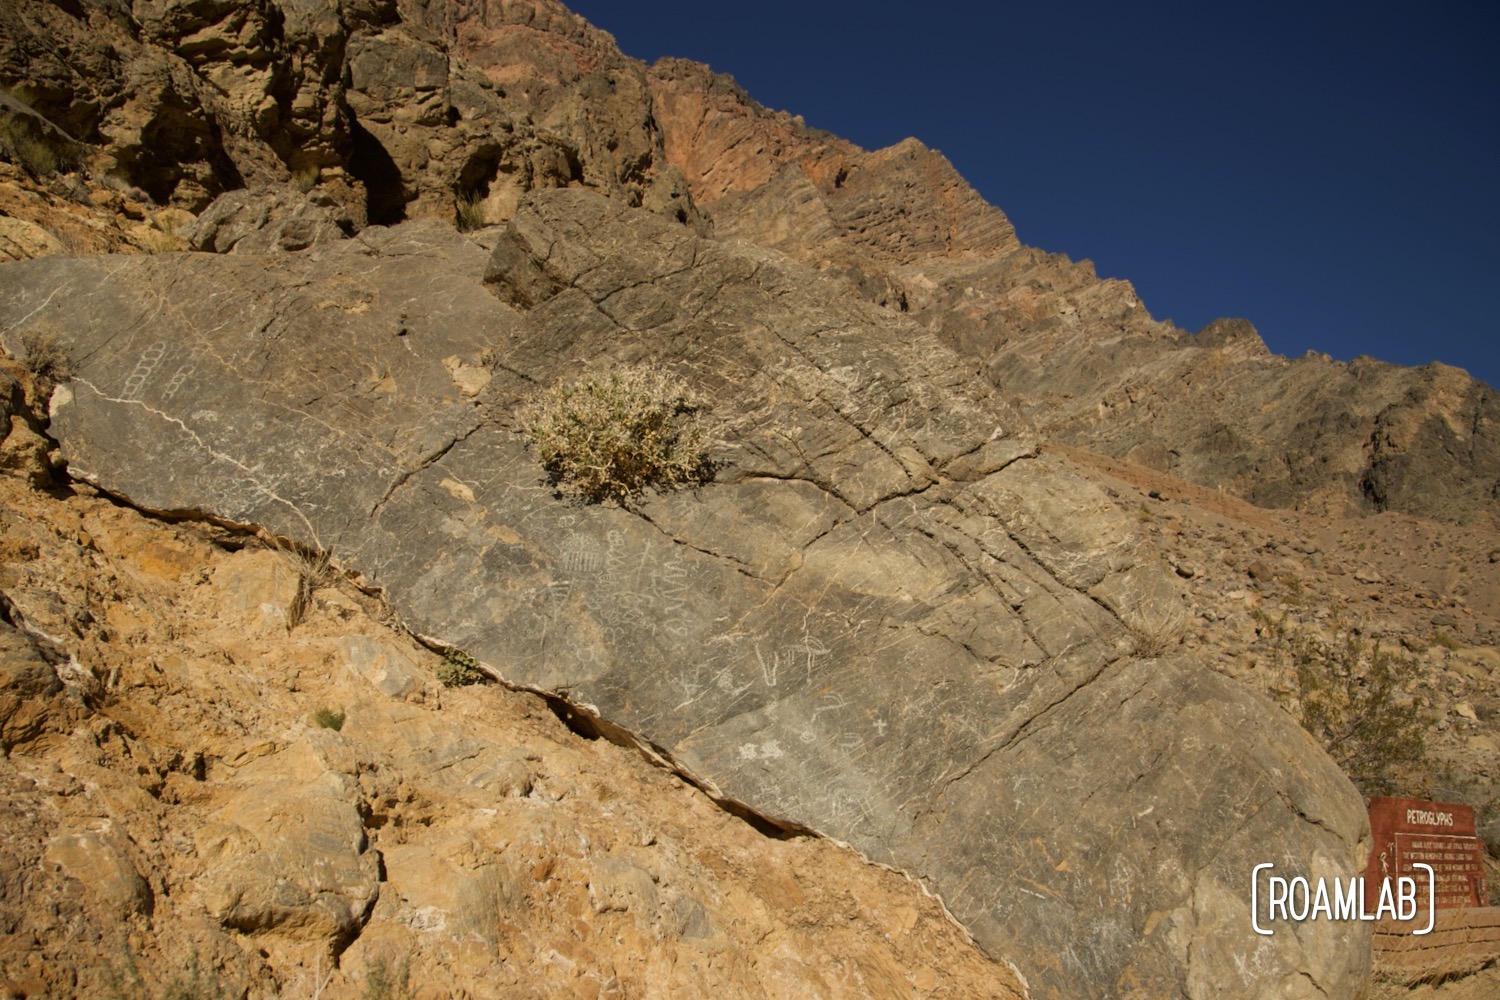 White petroglyphs covering a rock along Titus Canyon Road in Death Valley National Park, California.